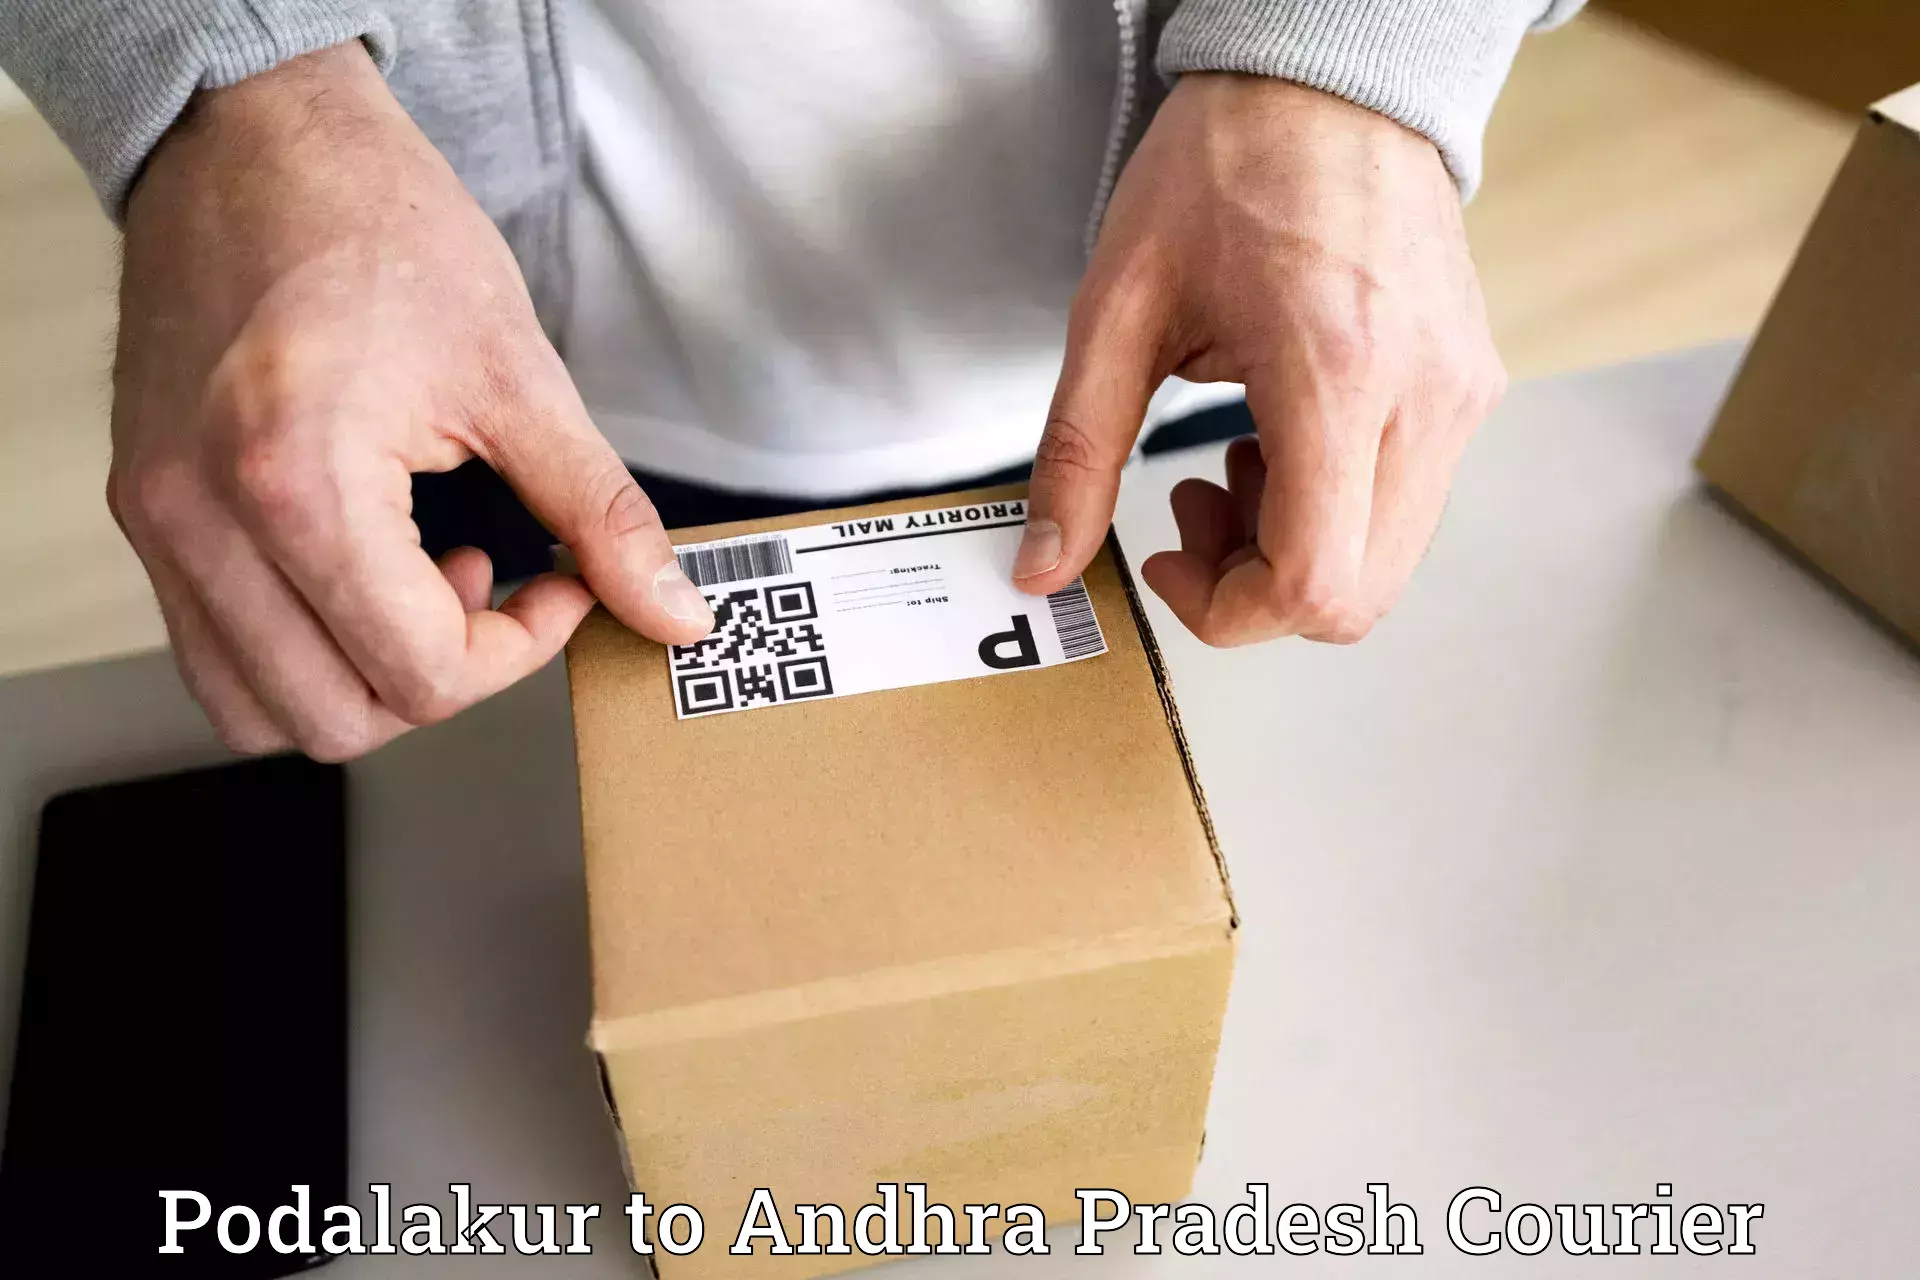 On-call courier service Podalakur to Chintapalli